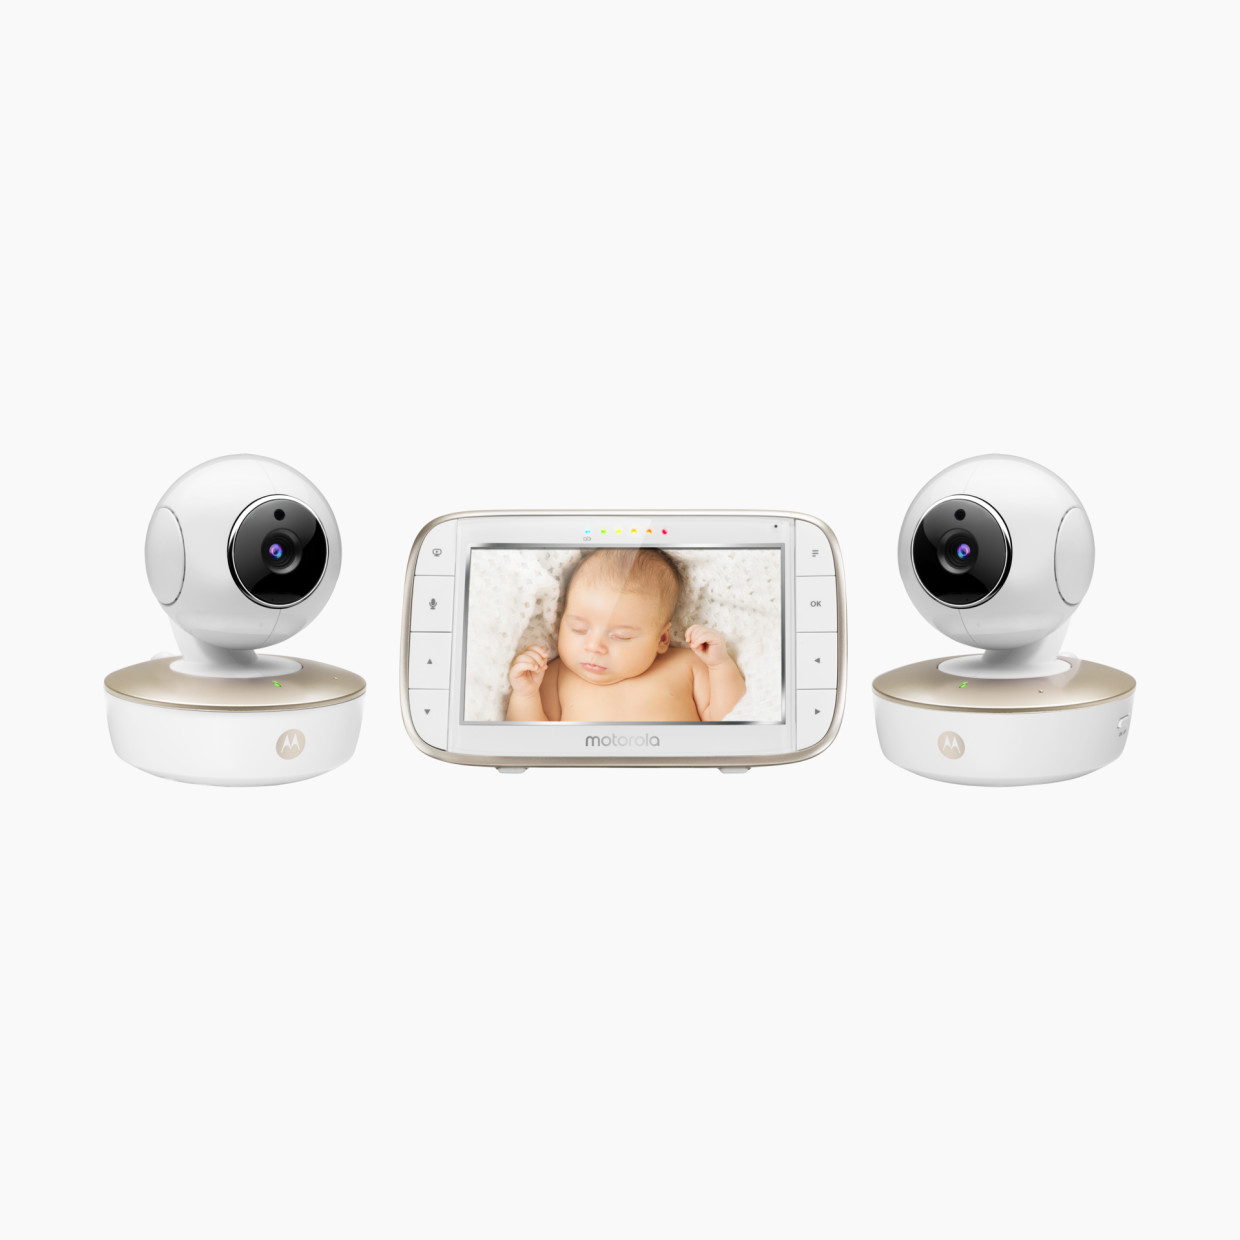 Motorola MBP50-G2 Video Baby Monitor with 5" LCD Screen & 2 Cameras.